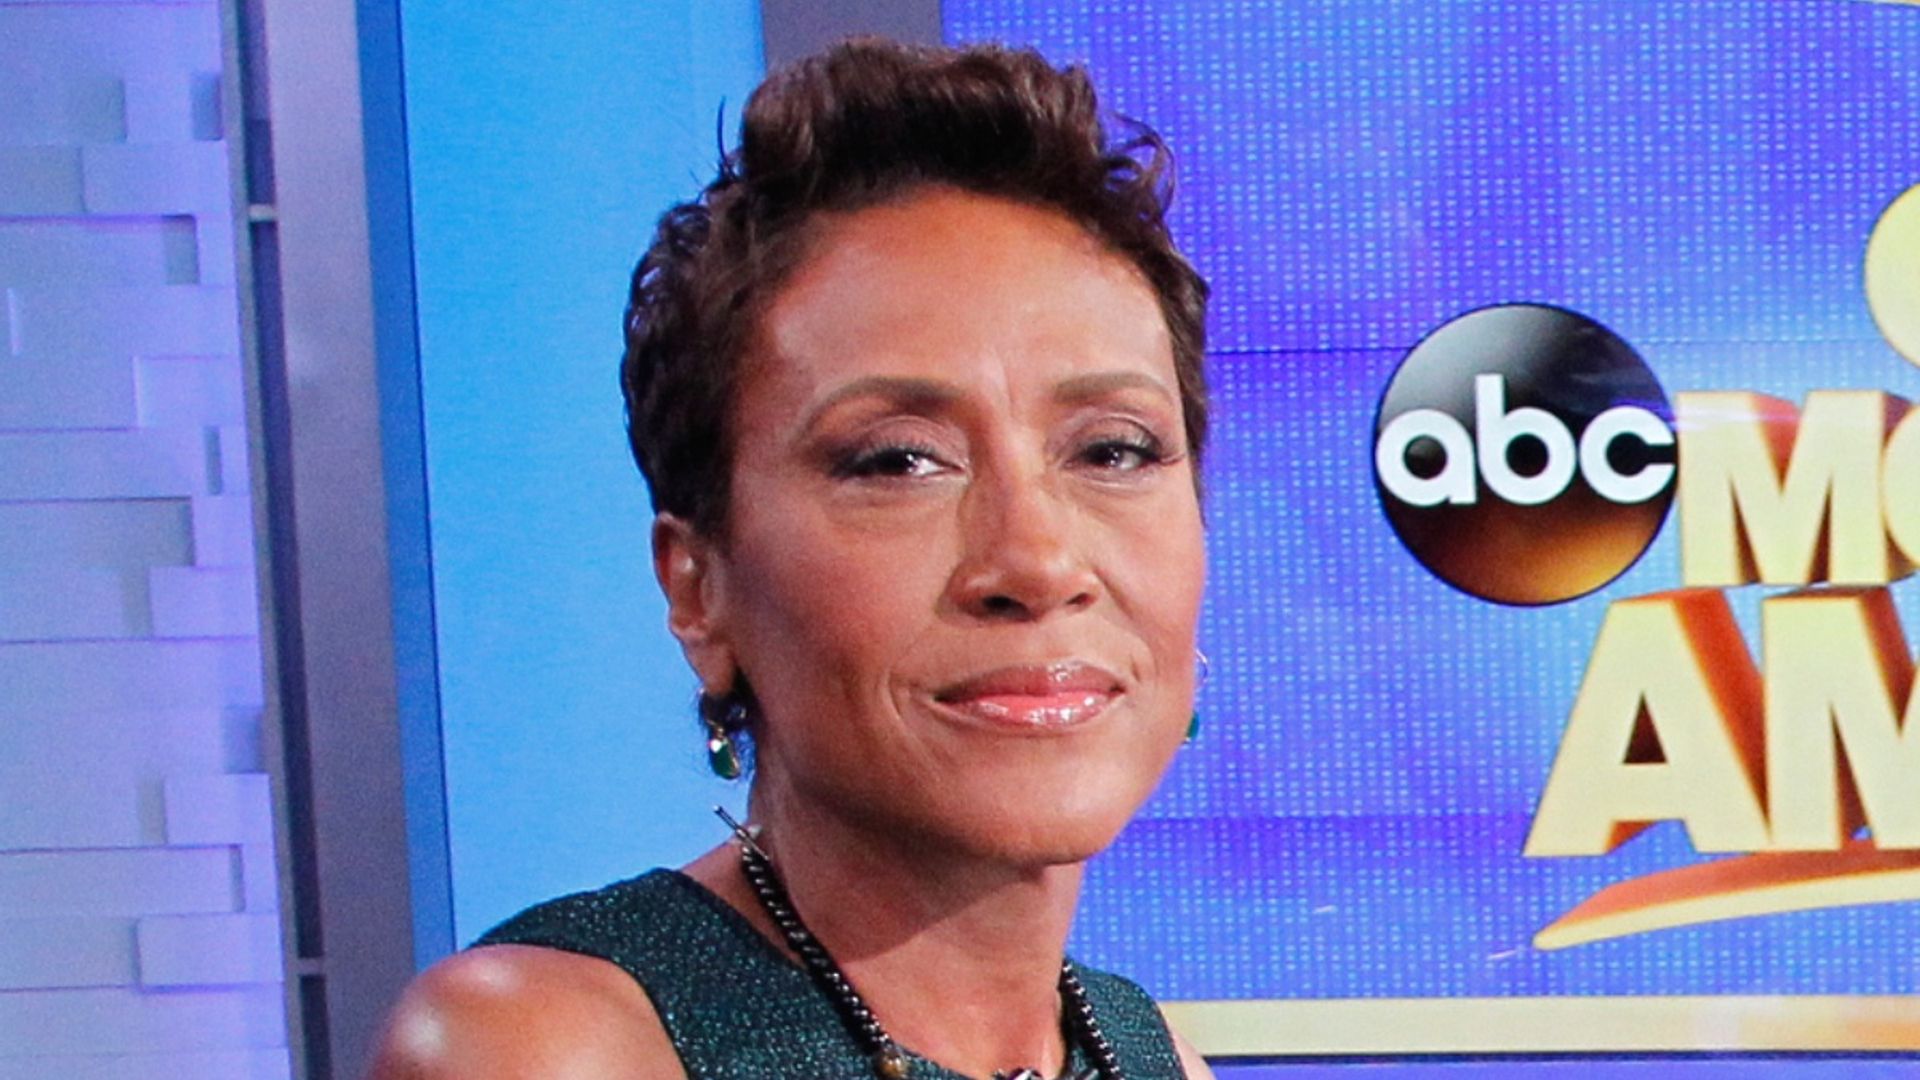 GMA's Robin Roberts pays emotional tribute to 'incredible' Barbara Walters